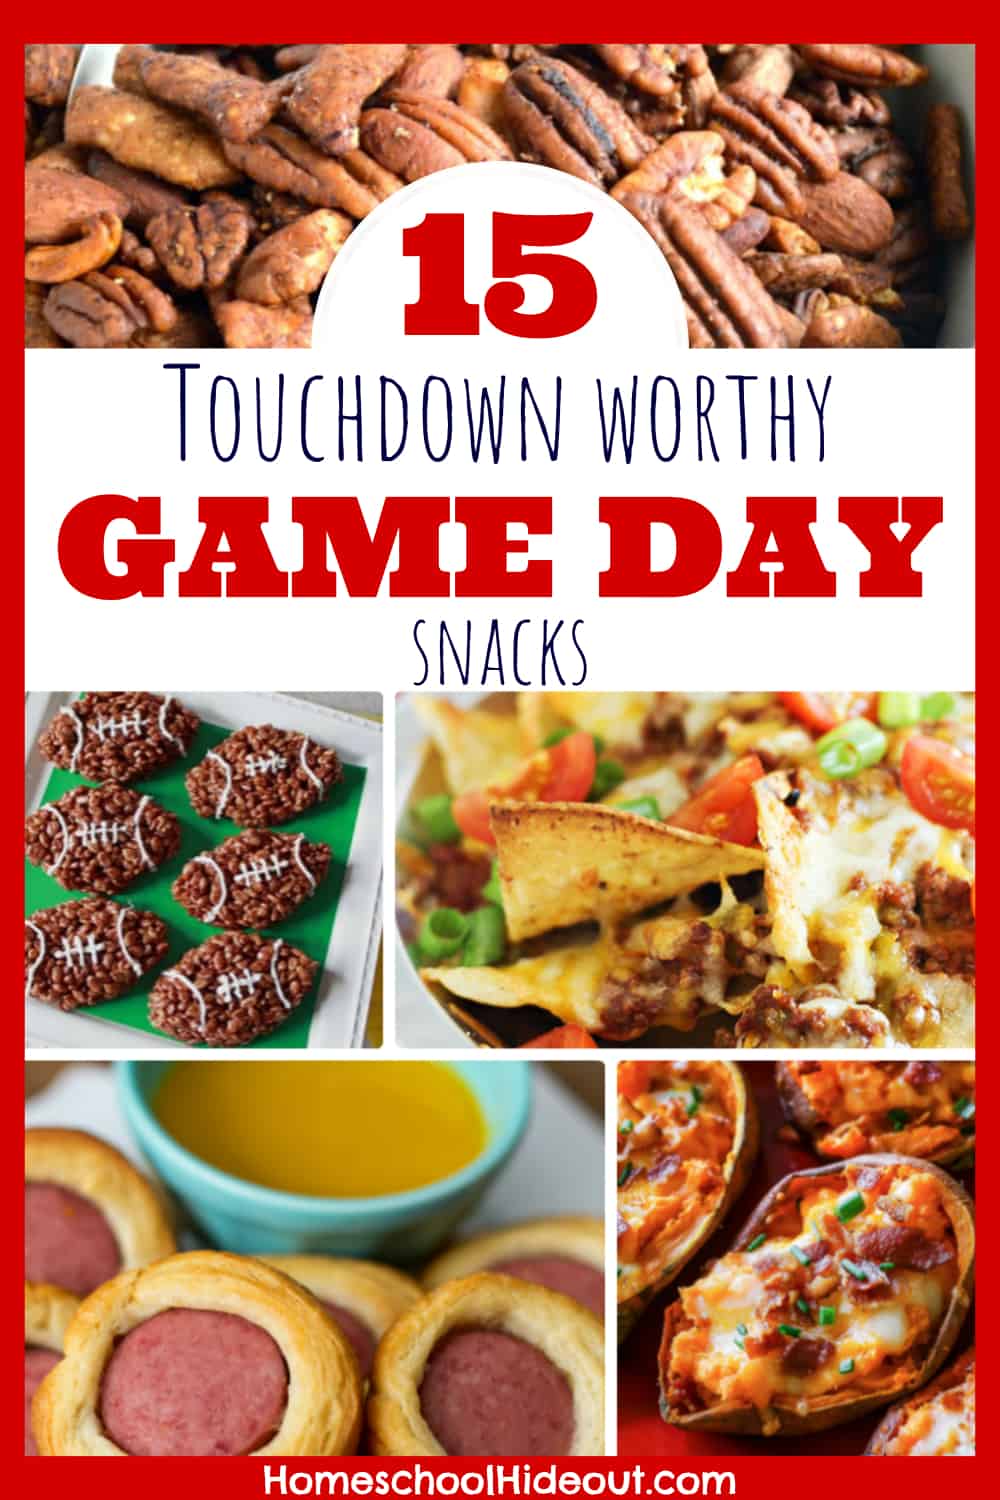 Check out these yummy game day snacks that won't disappoint!